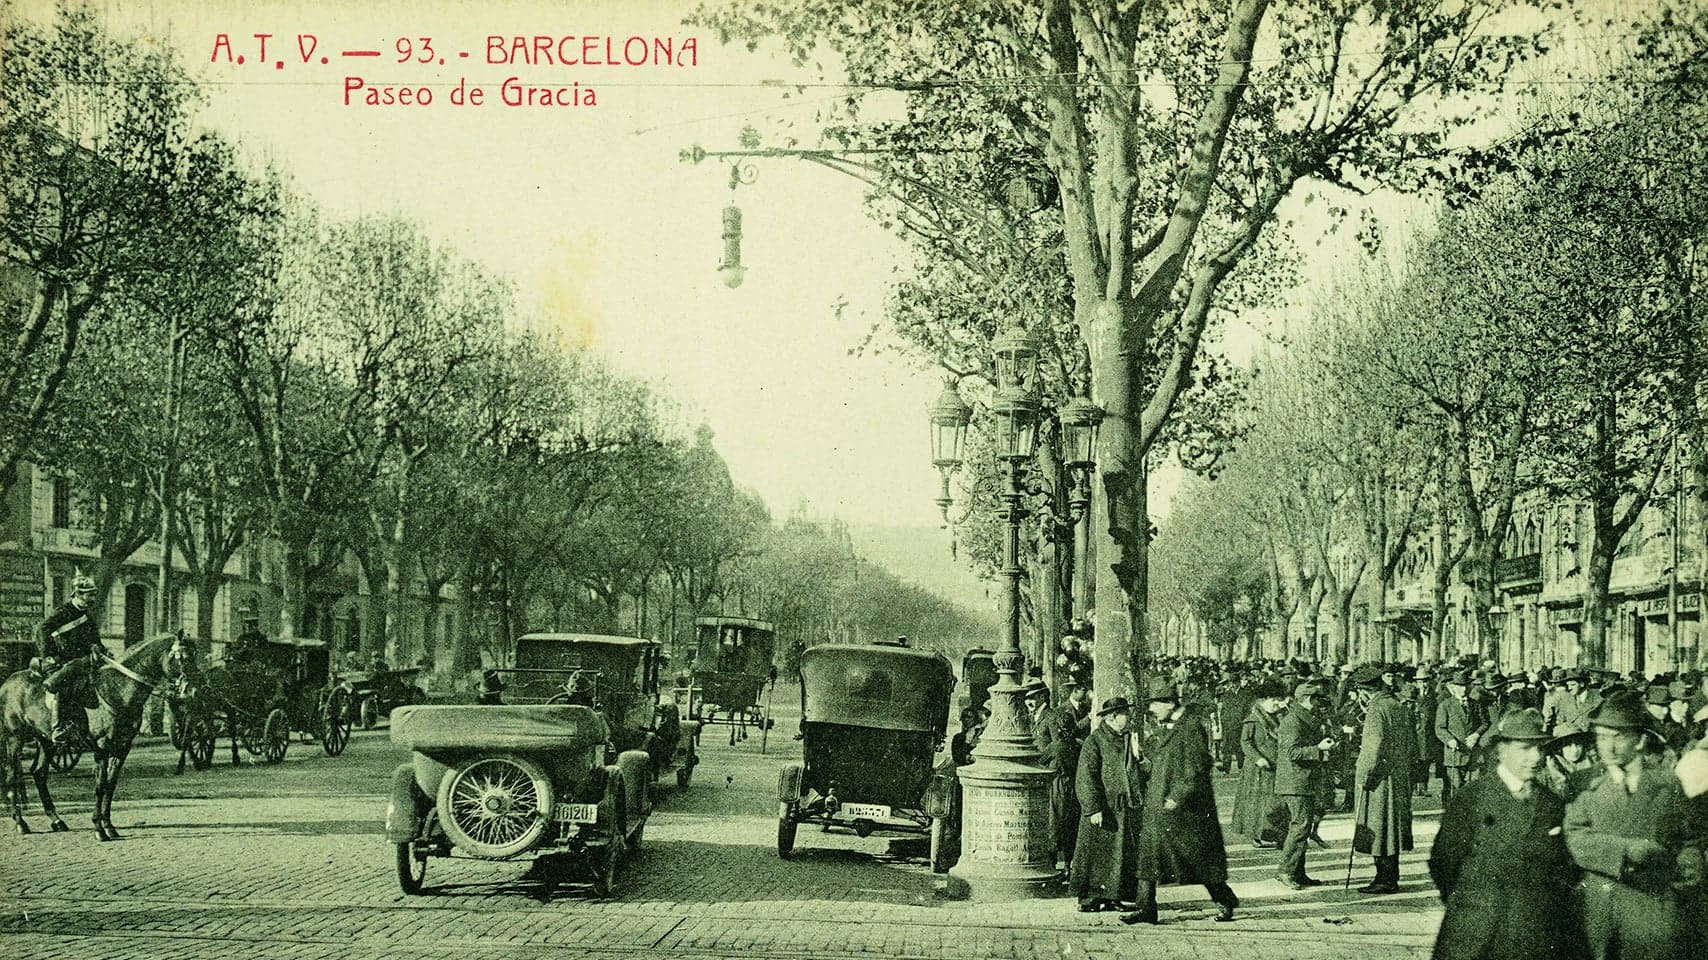 Pedestrians and horse drawn carriages on the street in Barcelona